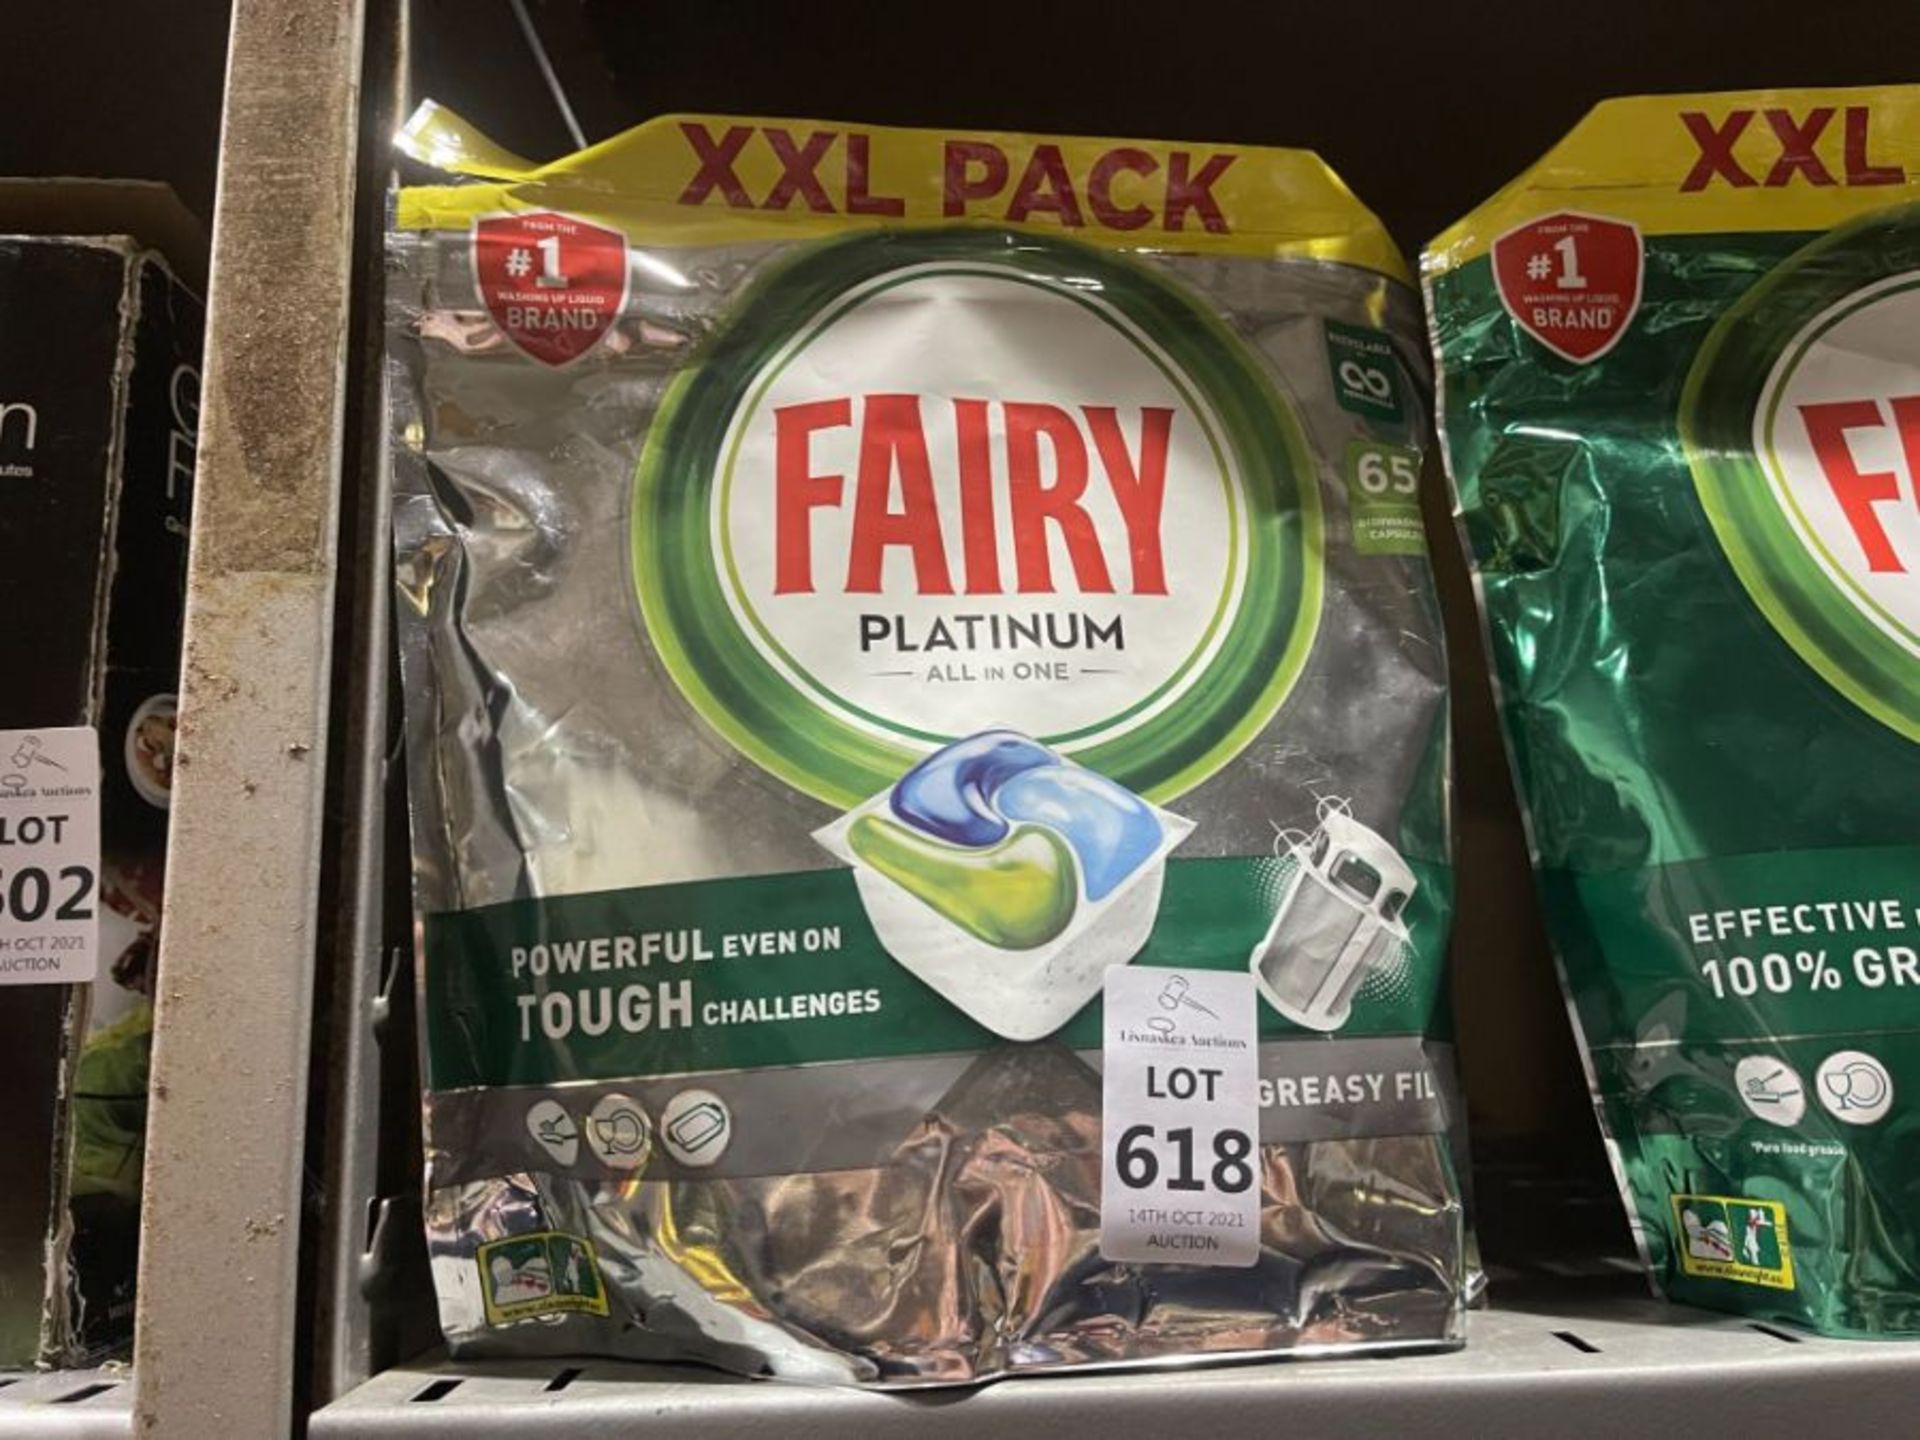 XXL PACK OF FAIRY PLATINUM ALL IN ONE TABS